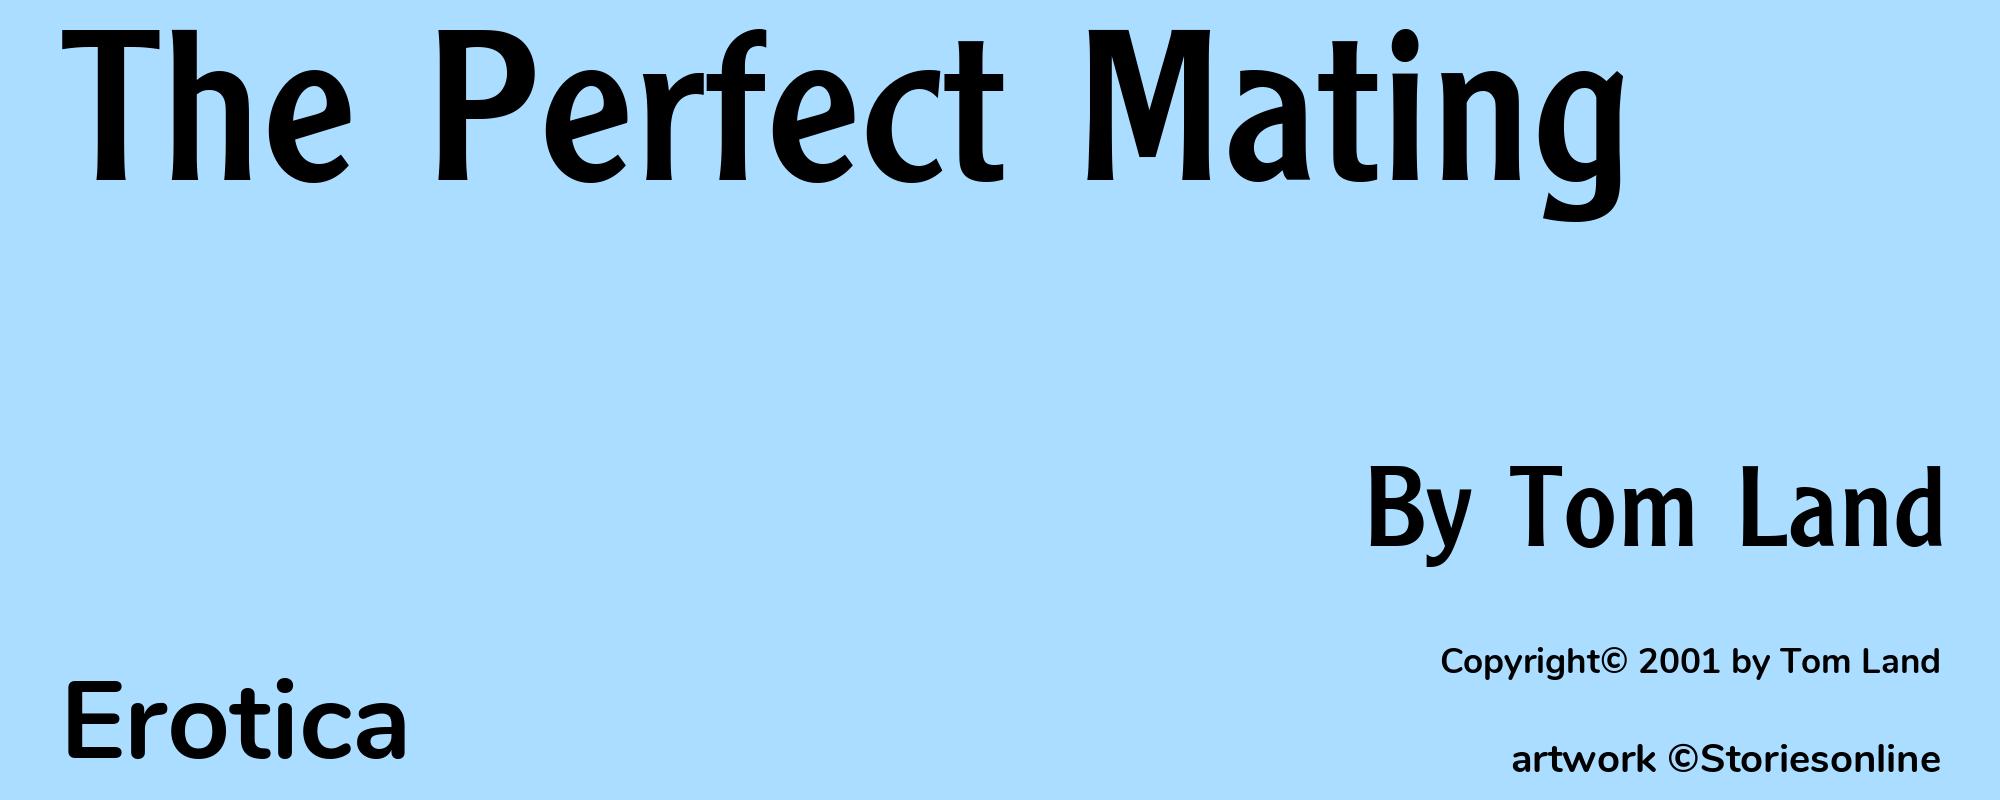 The Perfect Mating - Cover